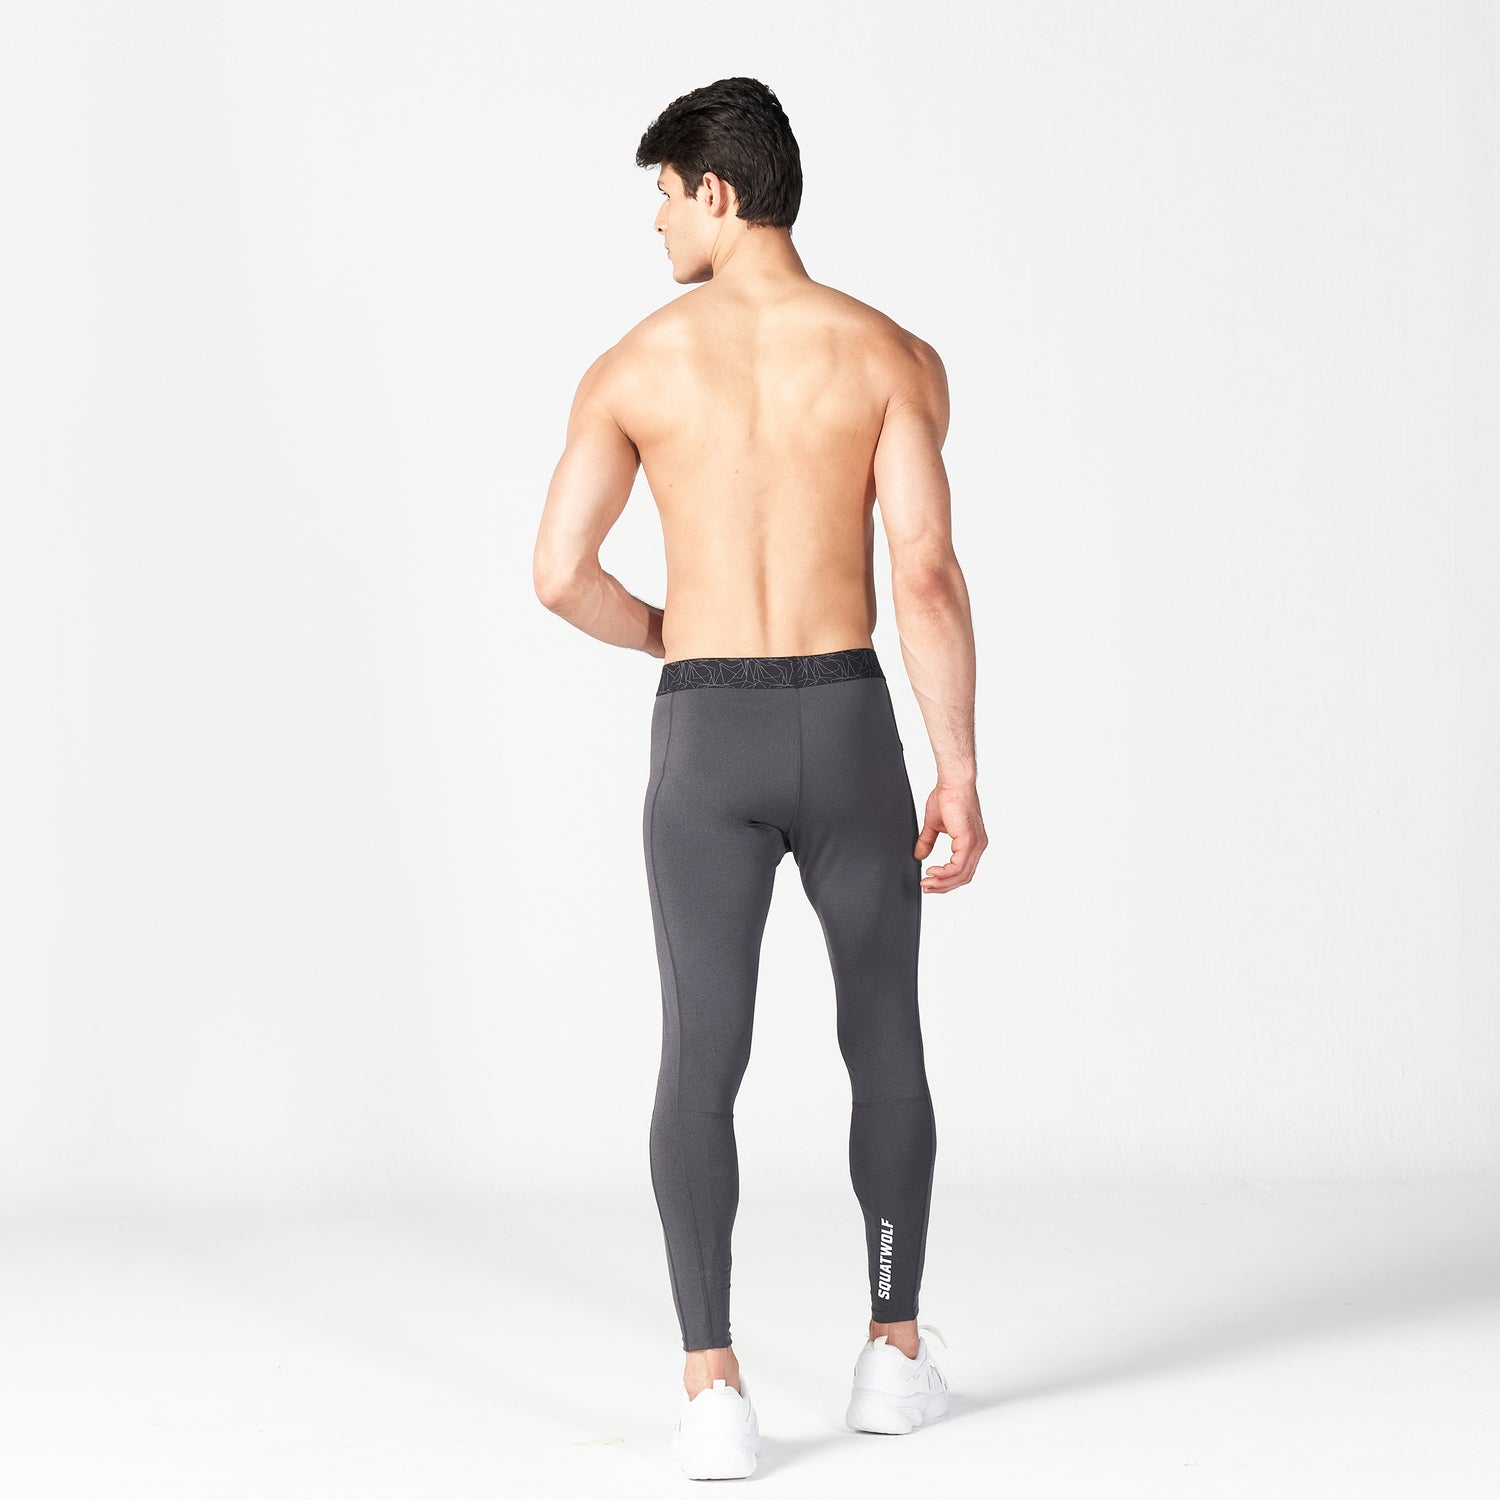 squatwolf-gym-wear-core-protech-tights-black-marl-workout tights-for-men